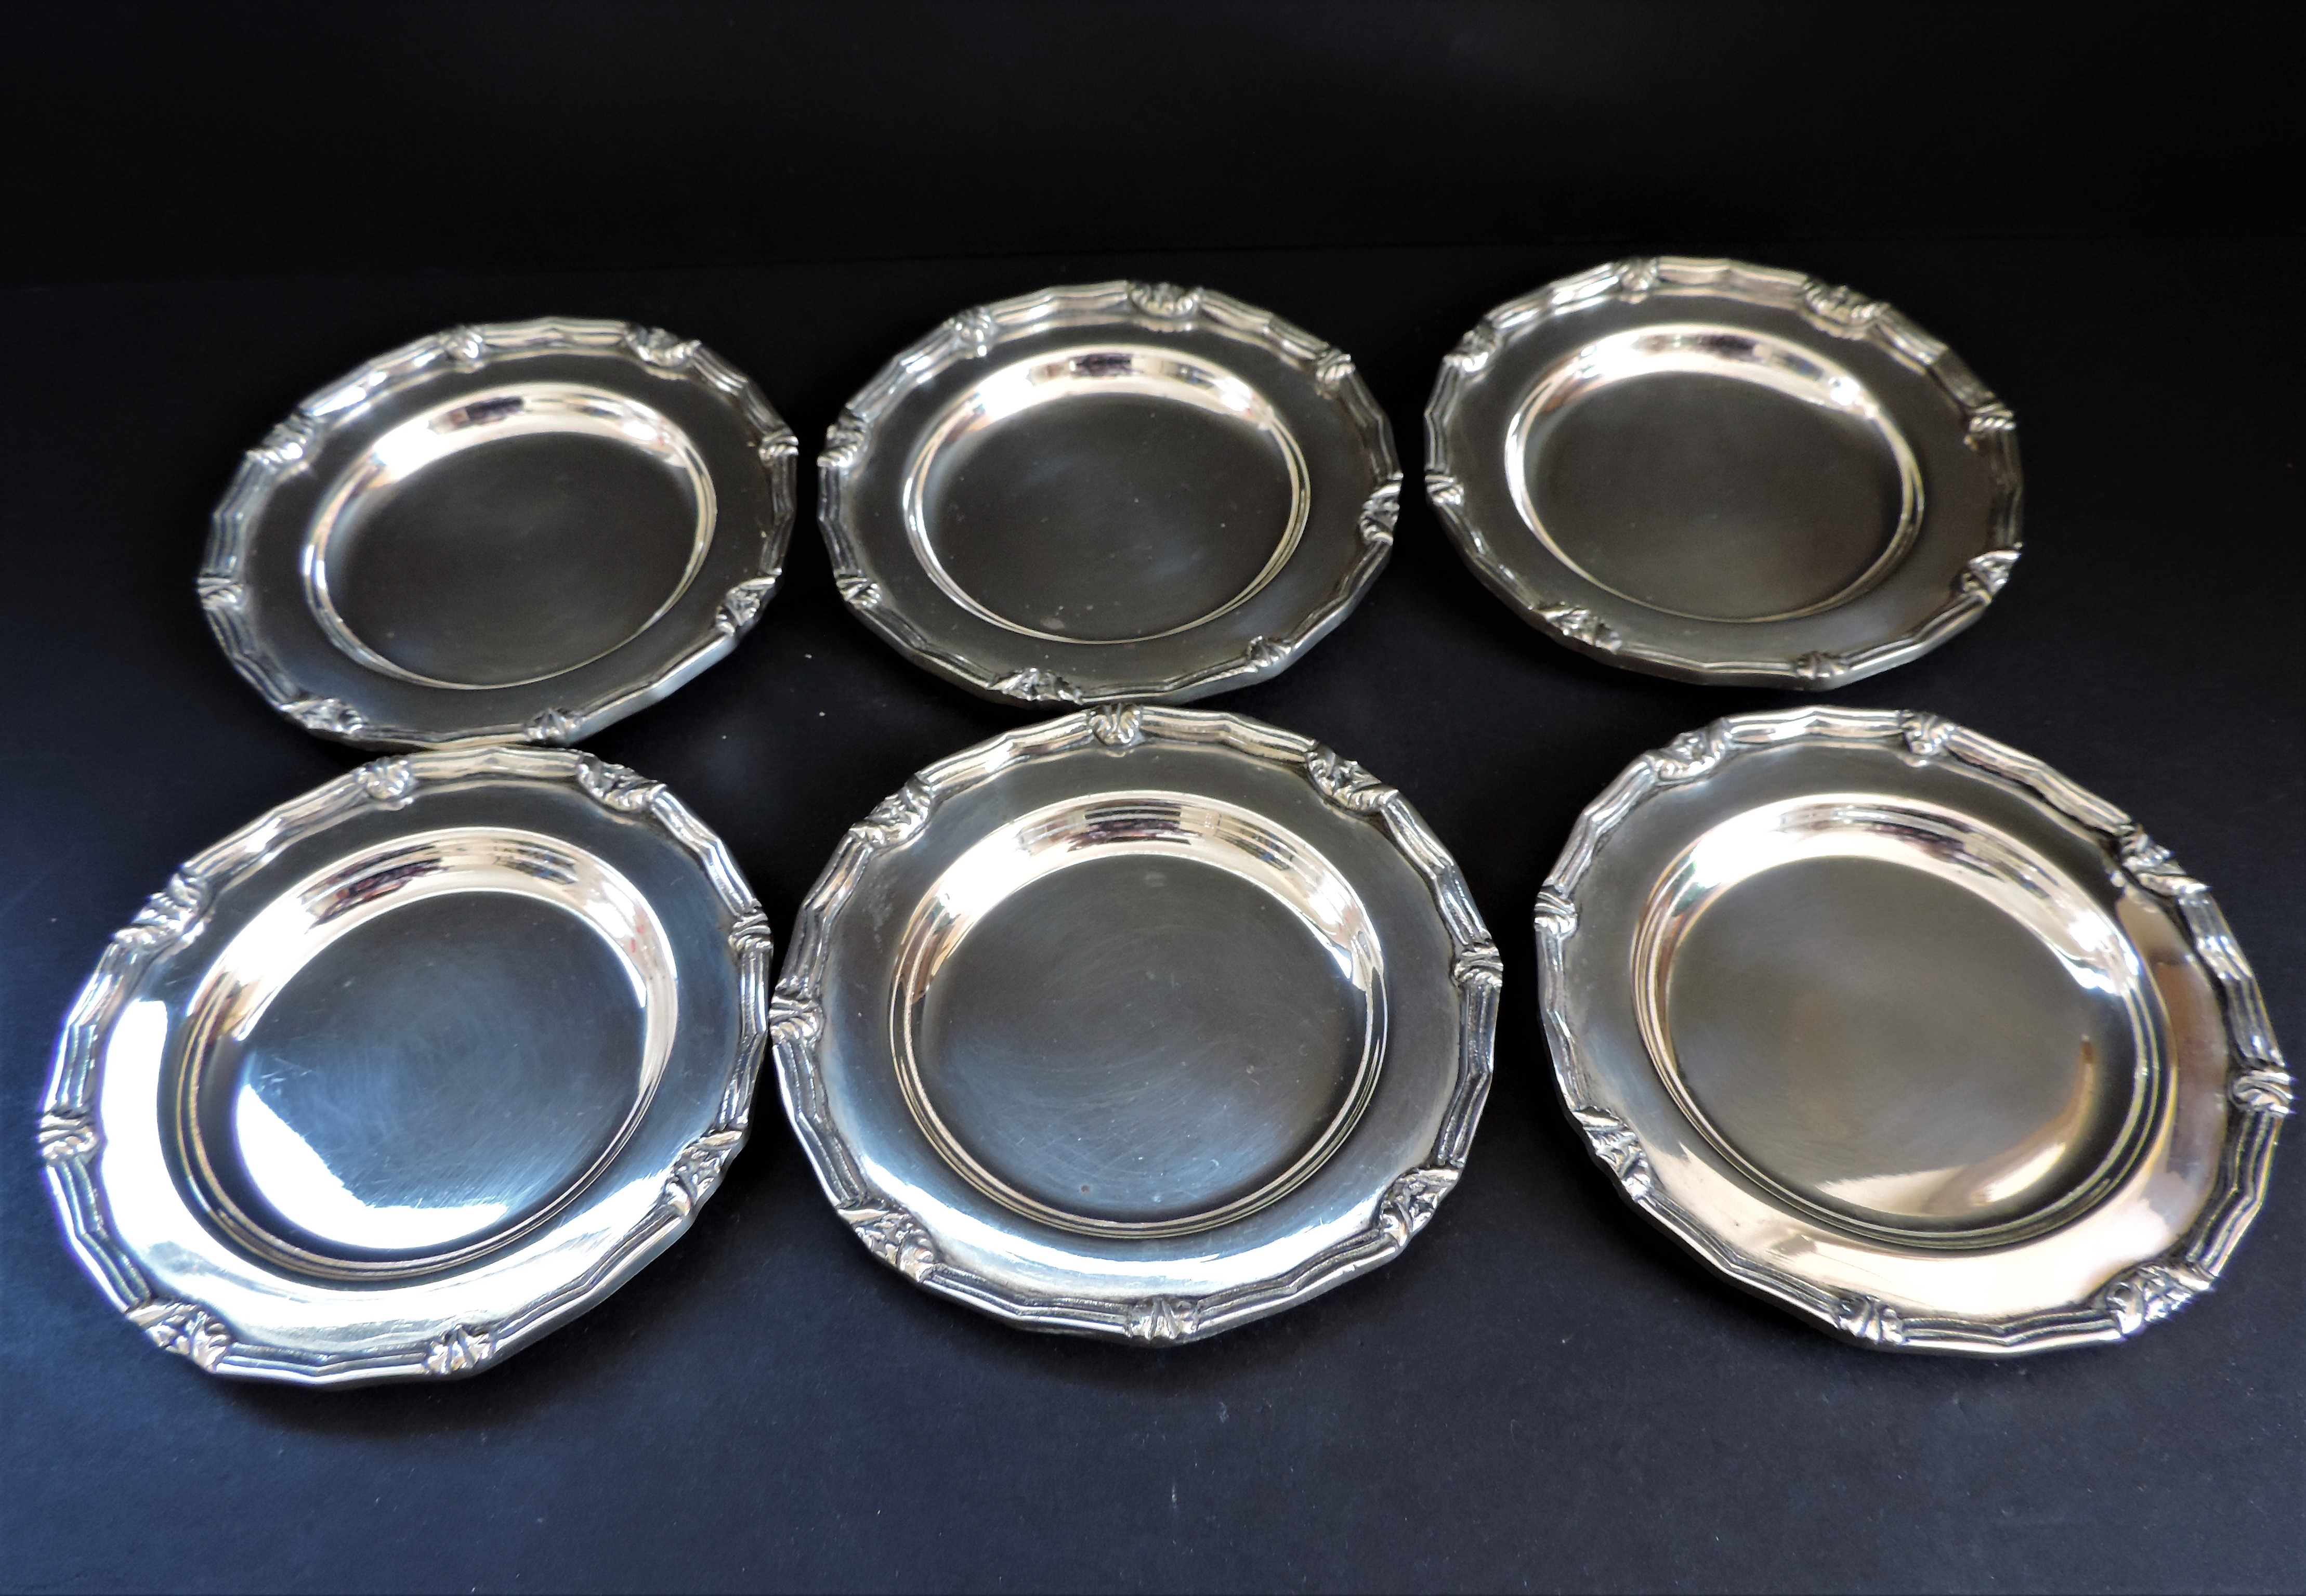 Set 6 Vintage Silver Plated Drinks Coasters - Image 4 of 4